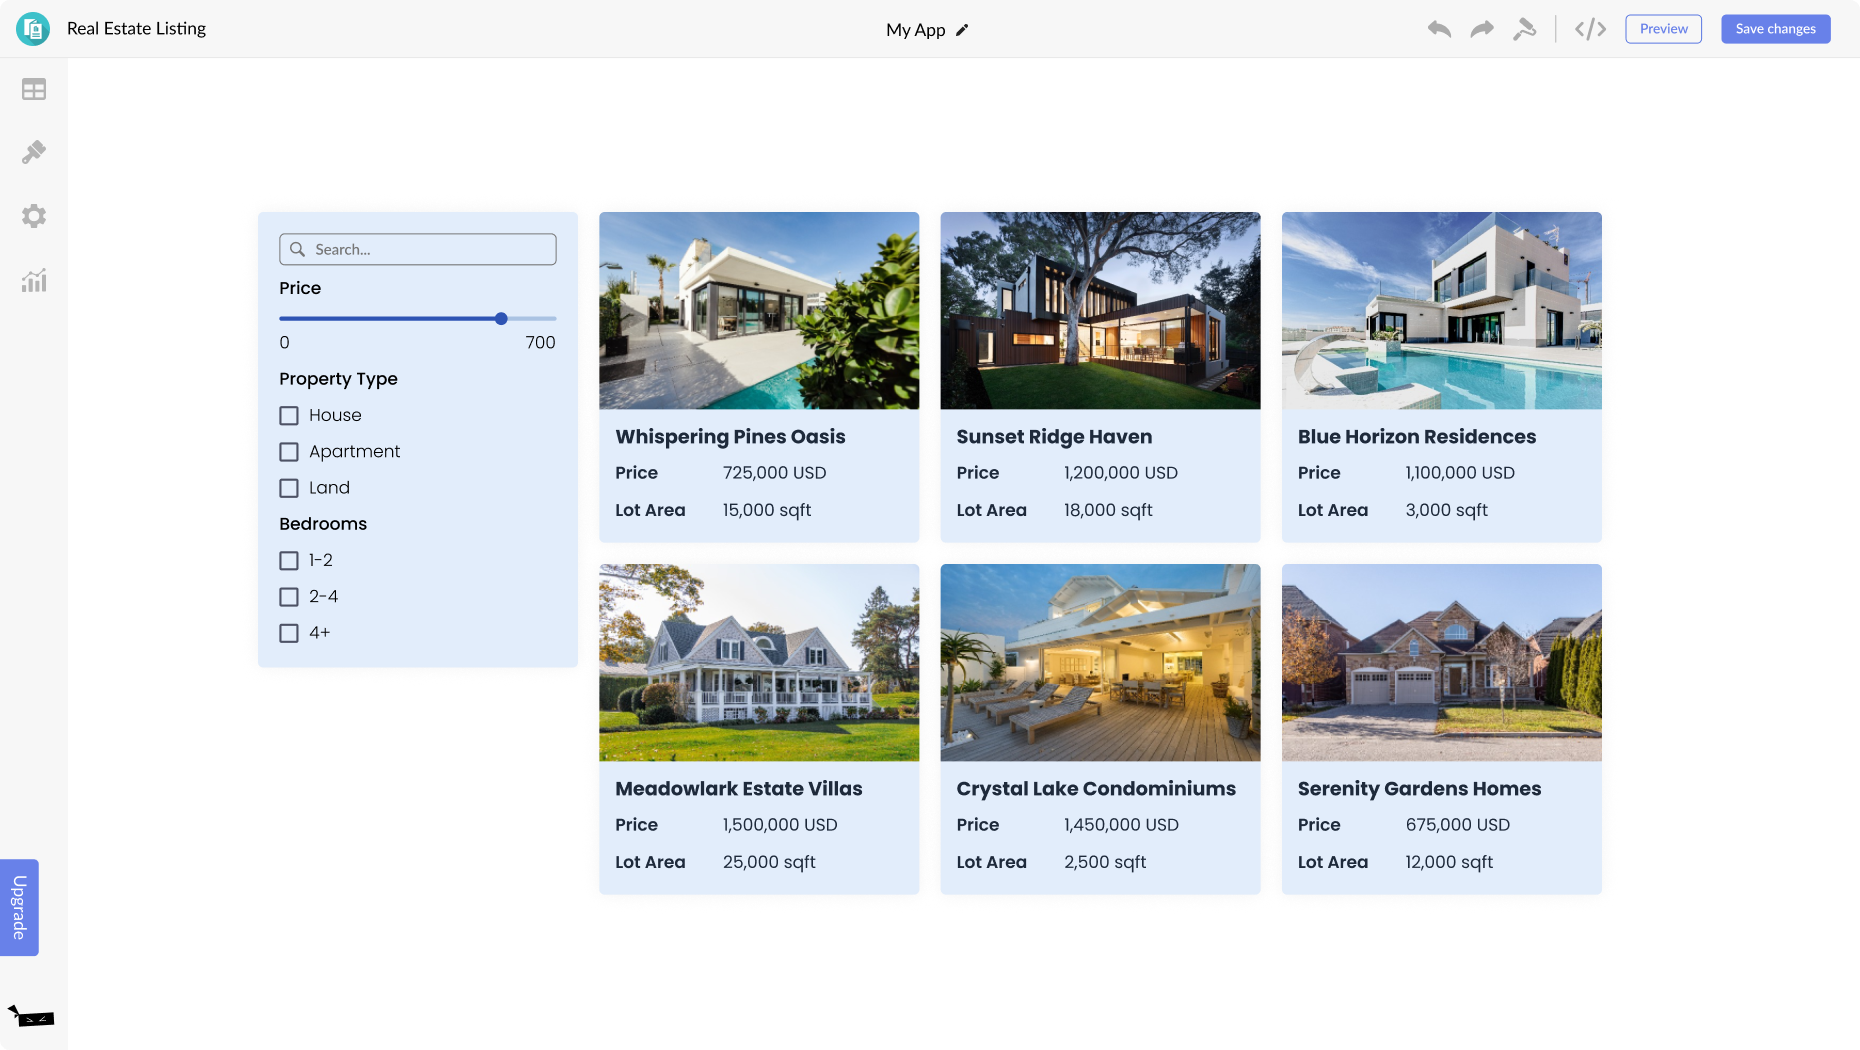 Real Estate Listings for CMS Max